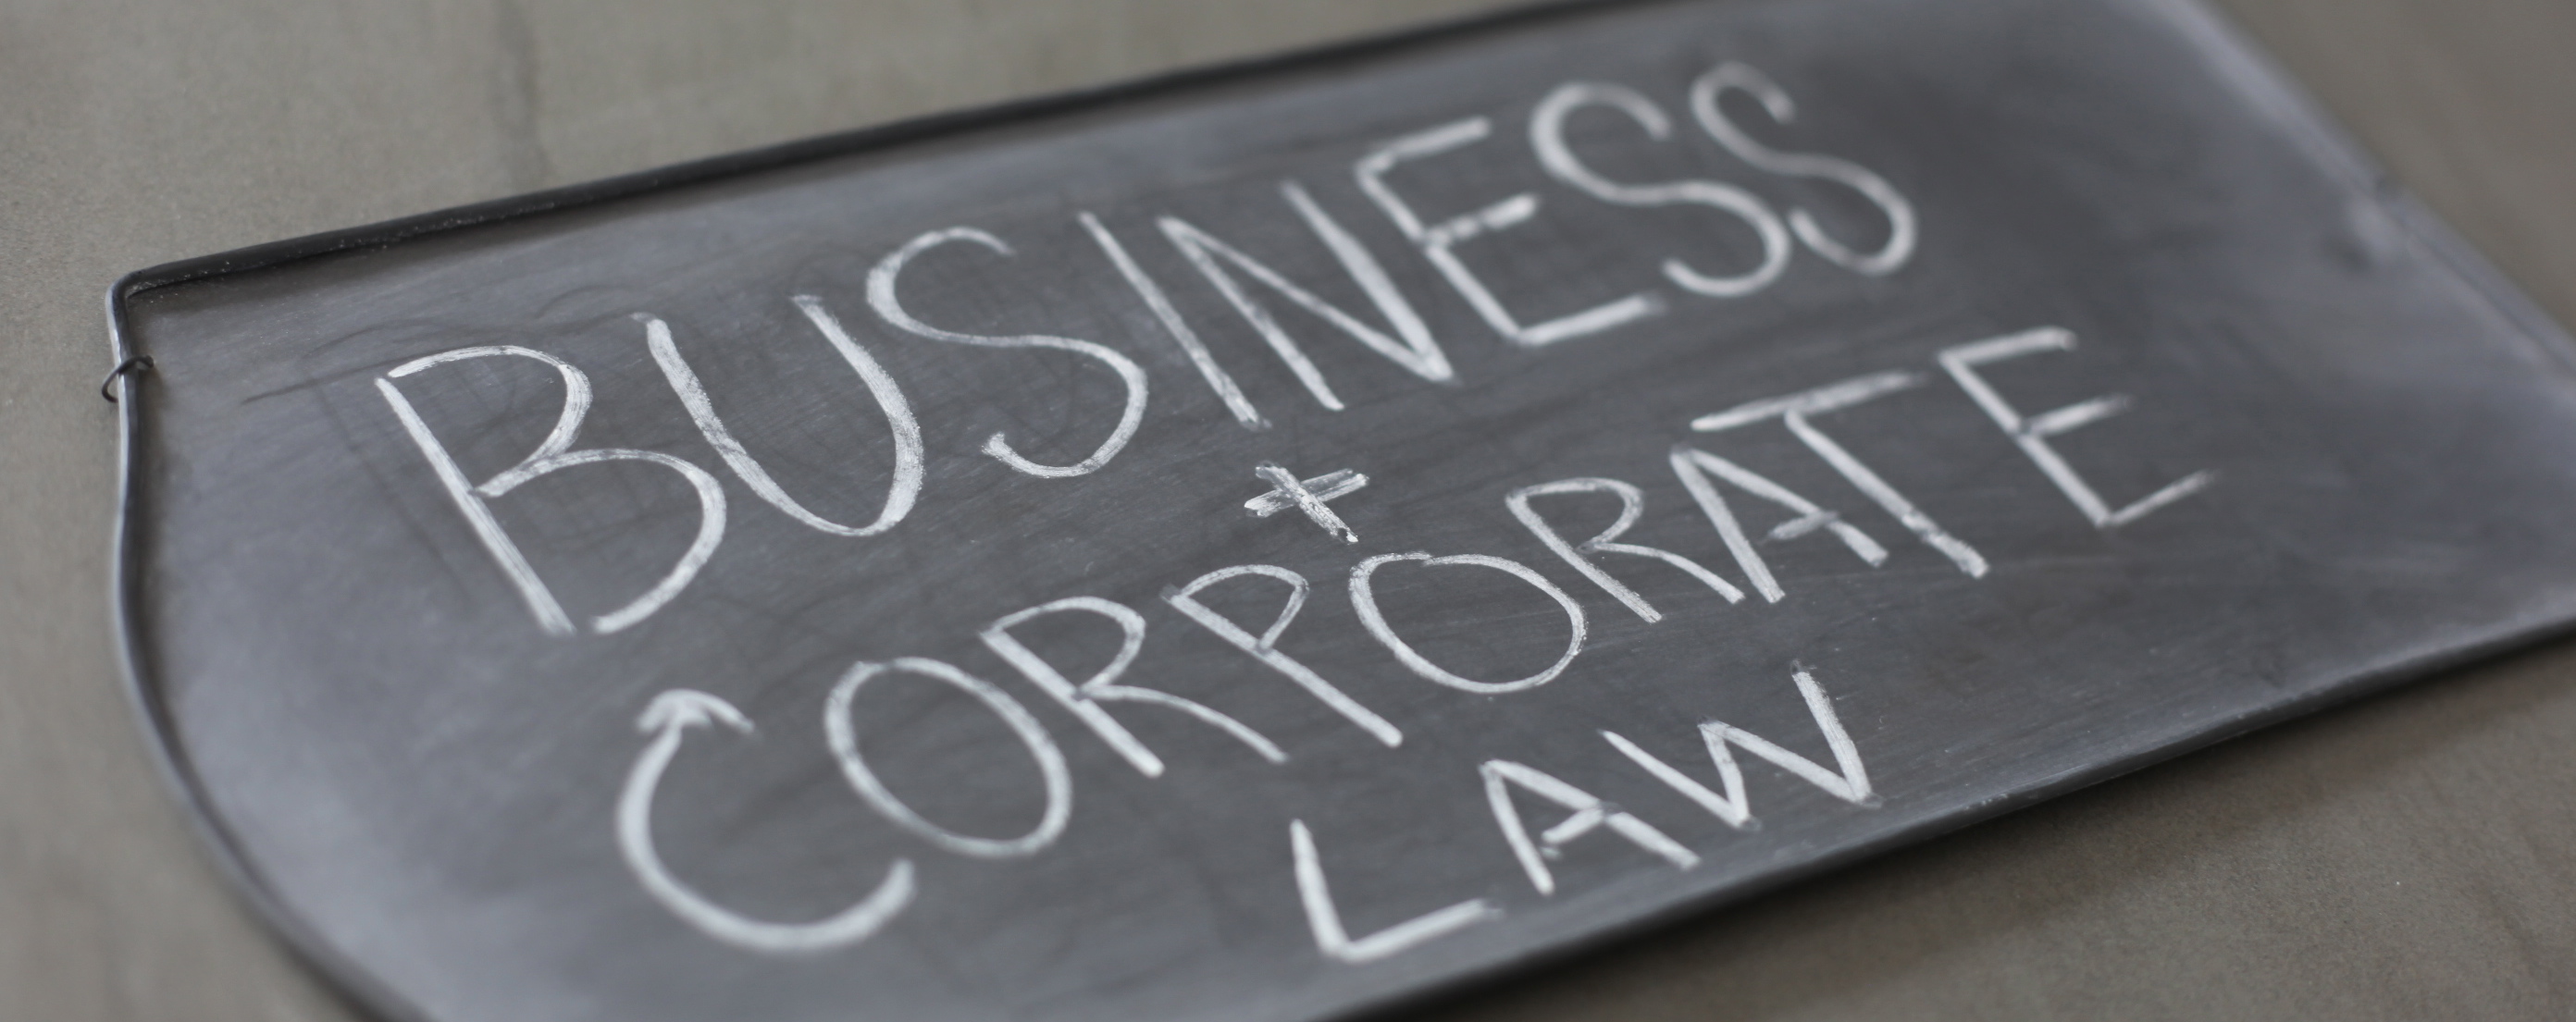 Business and Corporate Law